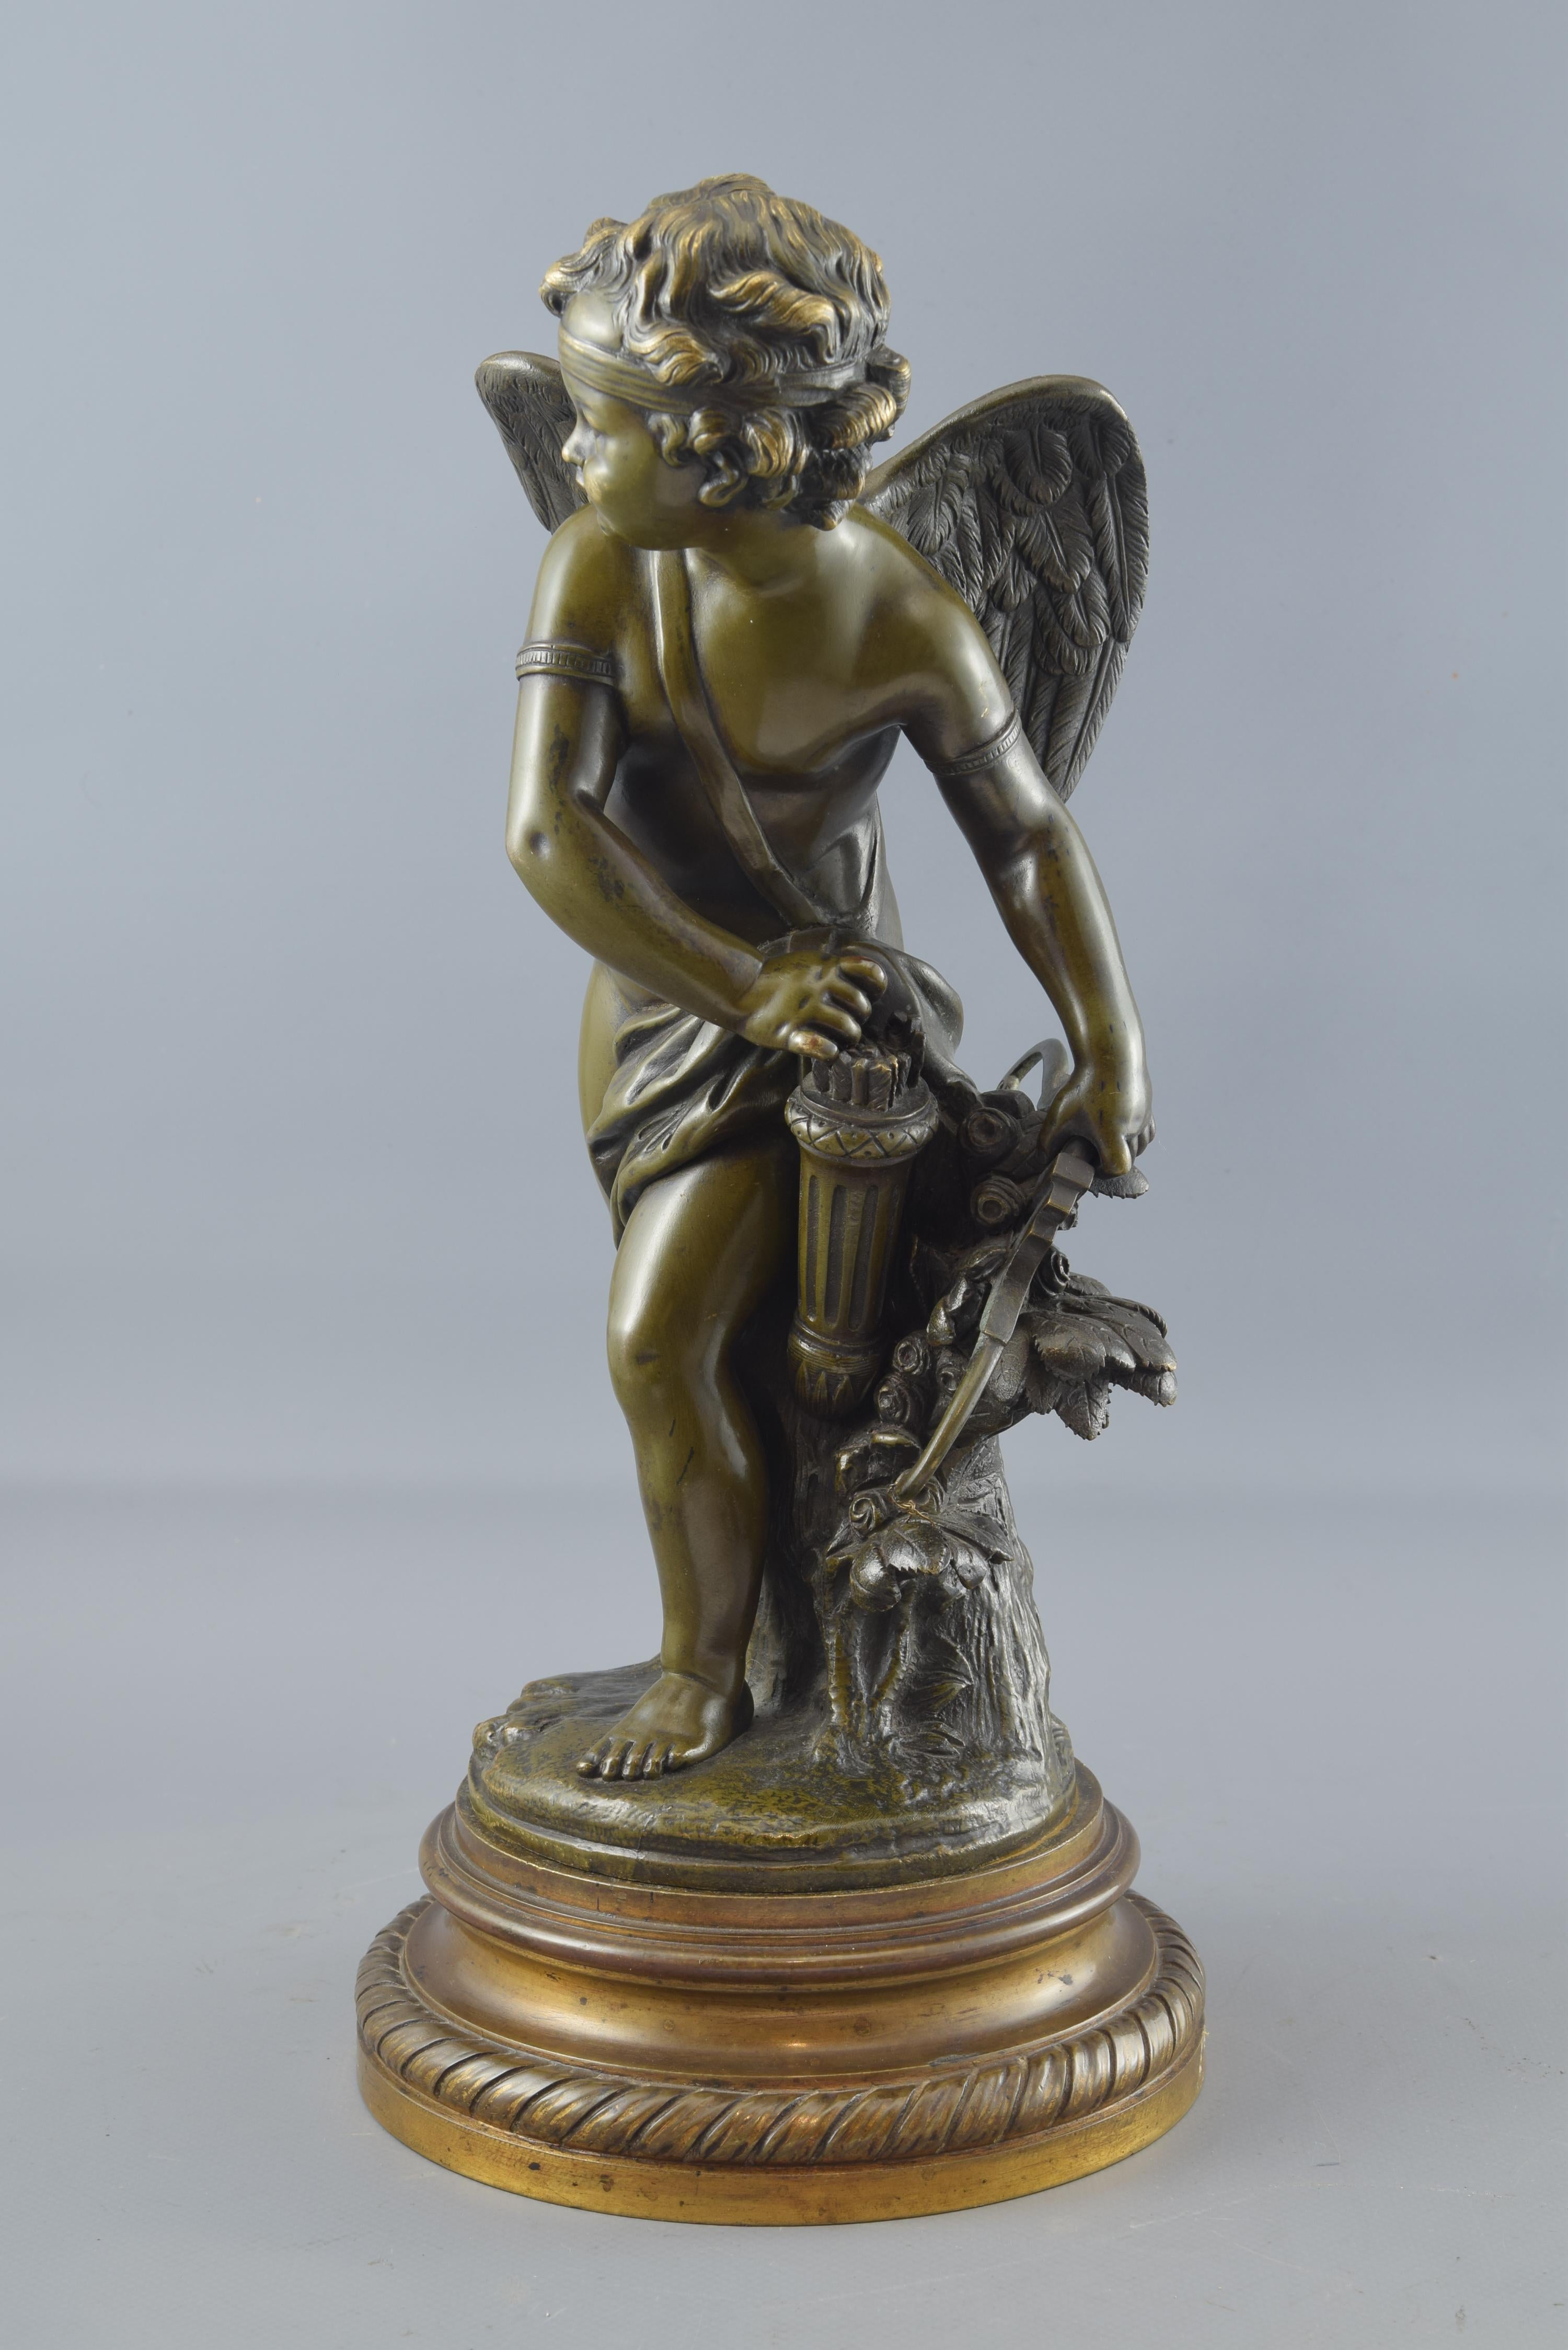 Sculpture in bronze of funidición to the lost wax. Patinated in green. The work shows a figure of Winged Cupid, with his quiver and bow, supported on a trunk with roses and turning his body to bring movement to the work. This type of bronze figures